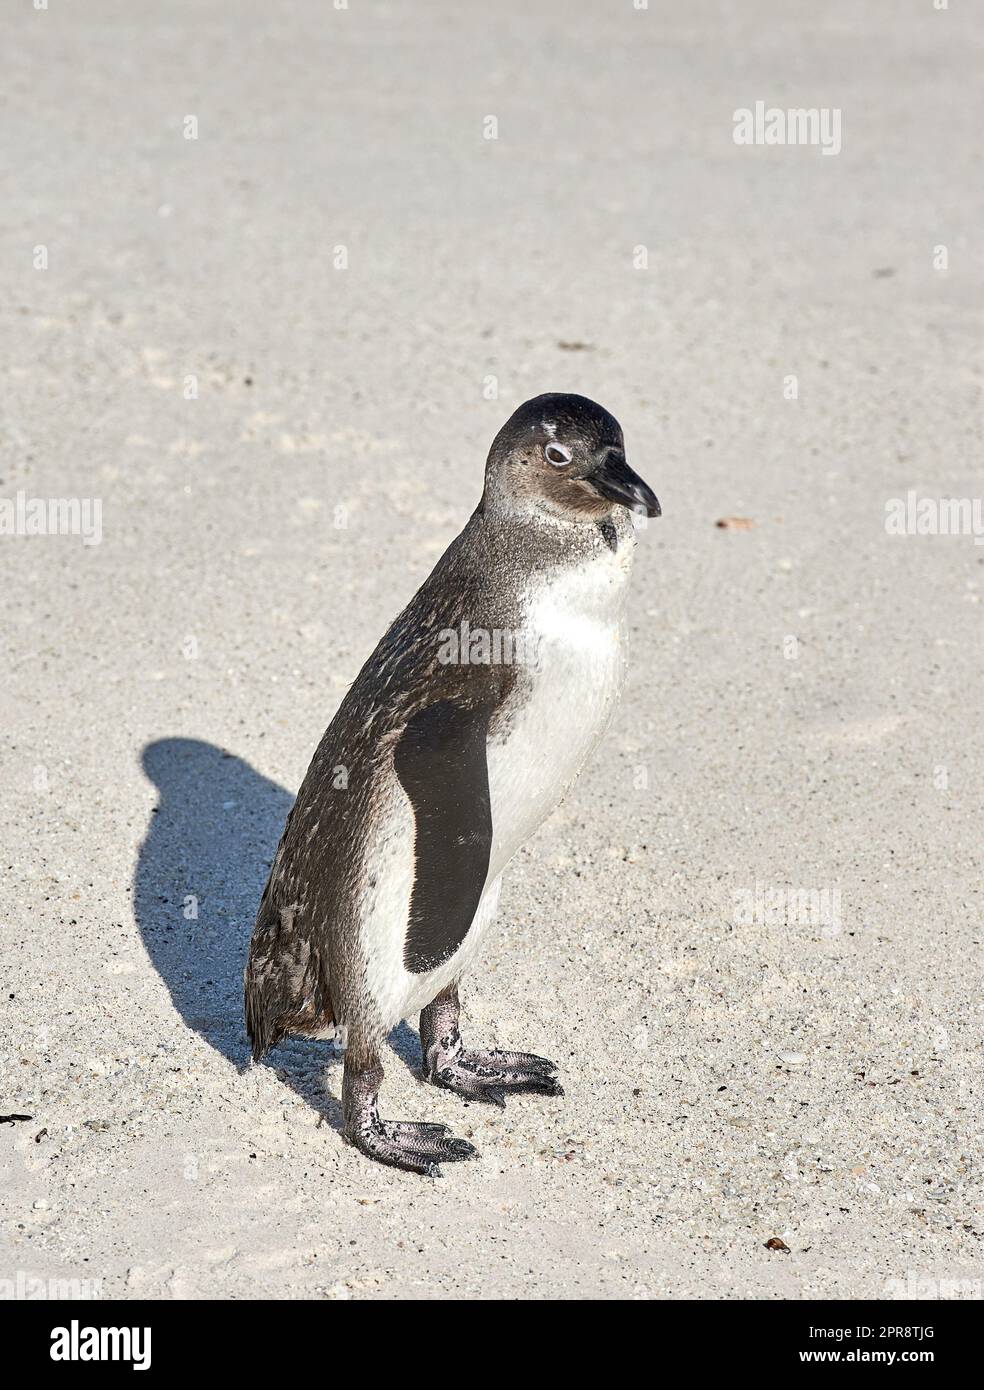 Closeup of black footed or African penguin on sandy boulder beach in Cape town. Natures majestic sea creature in its natural environment at a popular travel and tourism destination in South Africa Stock Photo